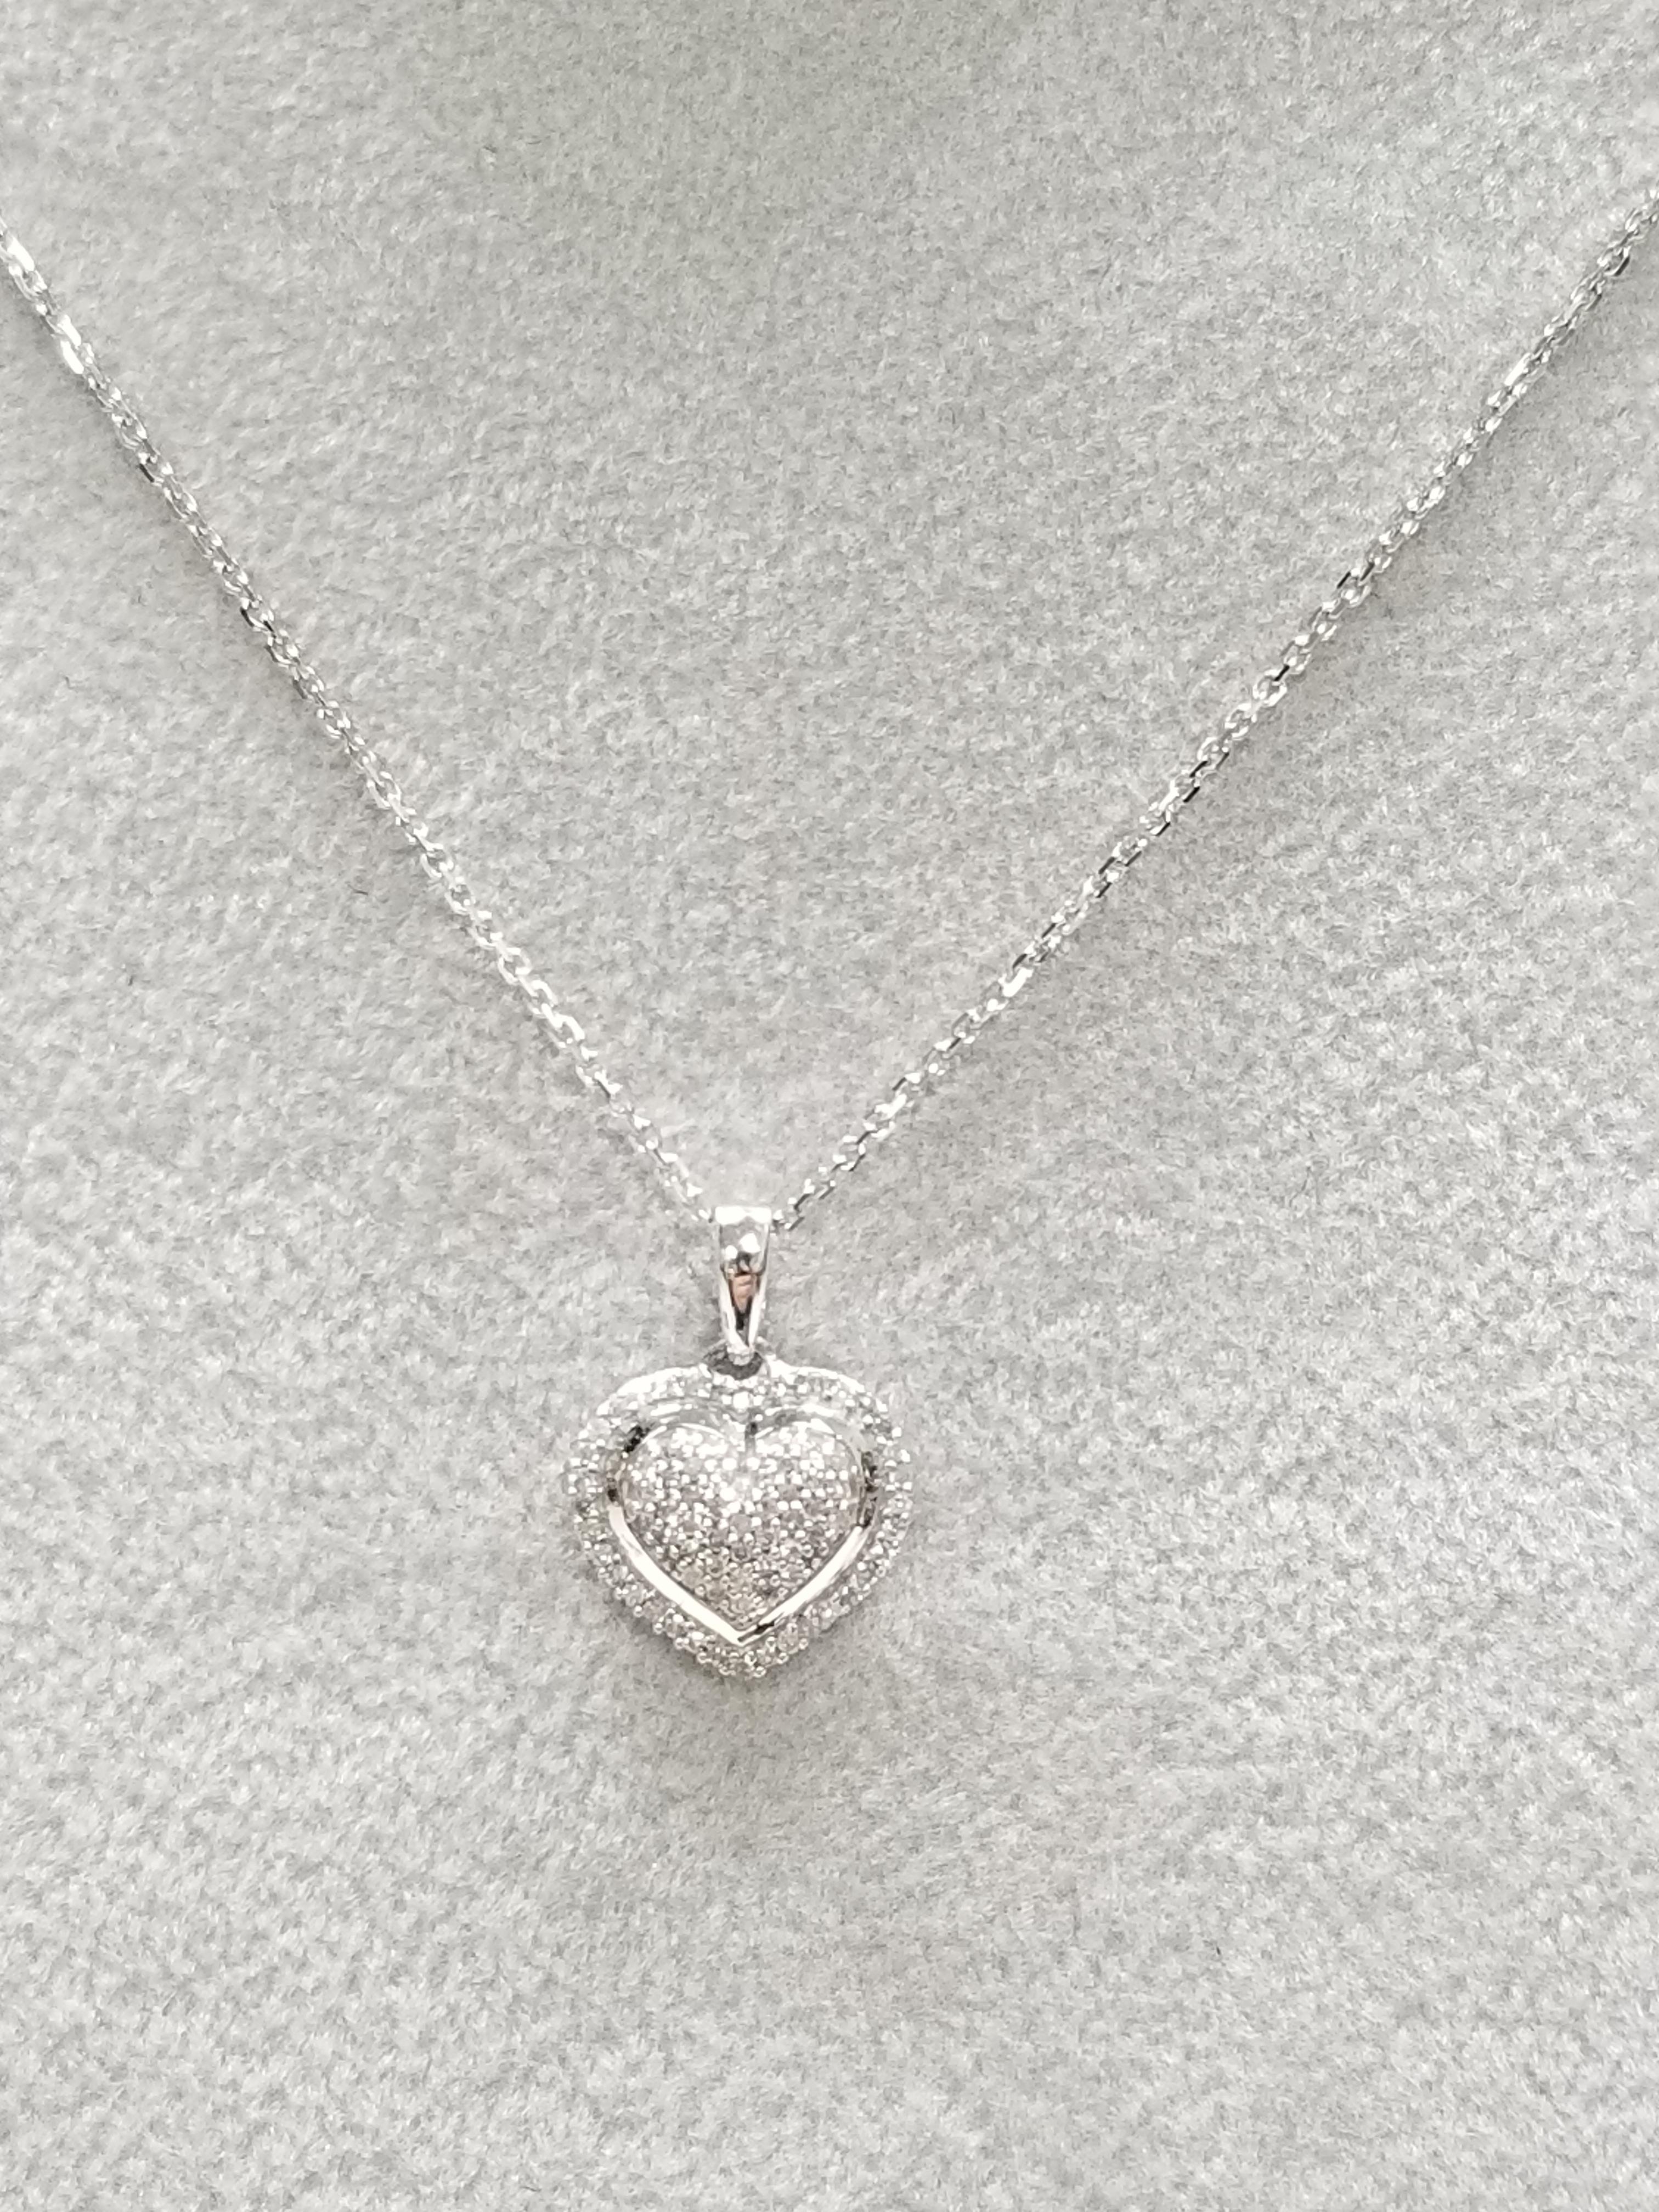 14k white gold diamond pave' set heart containing 77 round diamonds of very fine quality weighing .40pts. on a 16 inch chain.